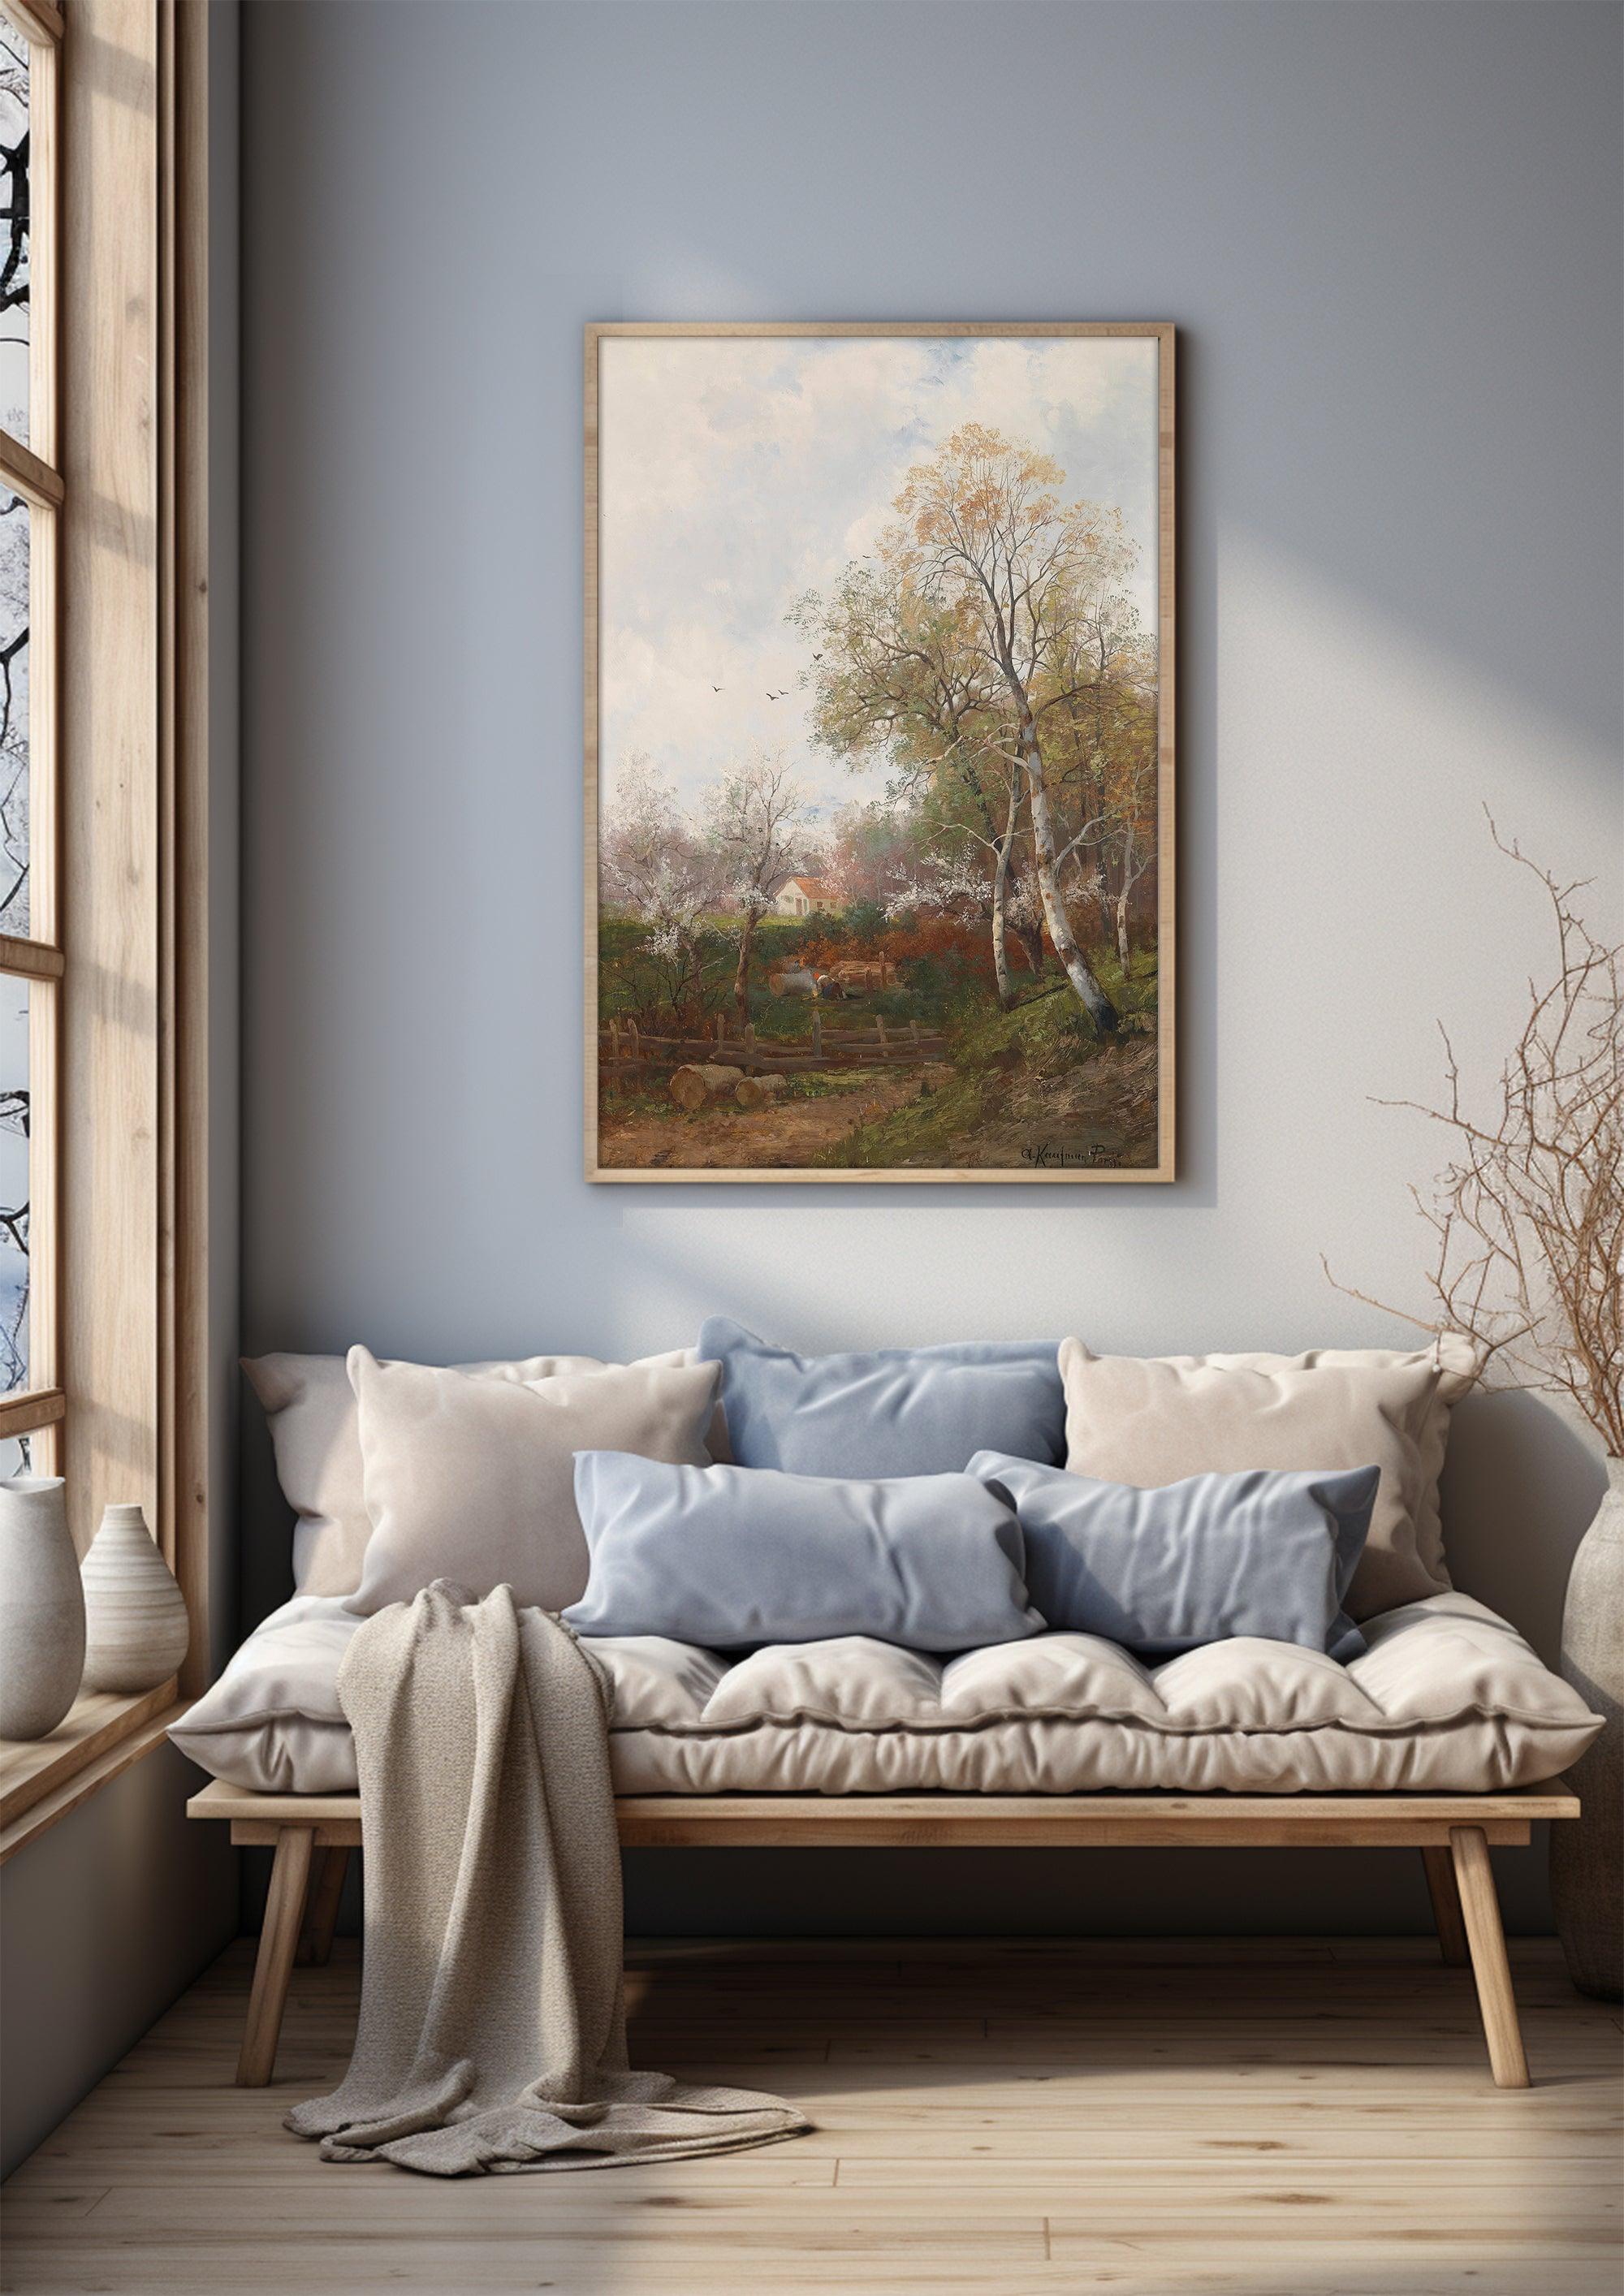 Landscape Canvas Painting Prints，World Famous Paintings Series，Moody Wall Decor，High-Quality Waterproof Decorative Canvas Art， Hotel Aisle Living Room Home Decor Art, Giclée Printing Technique